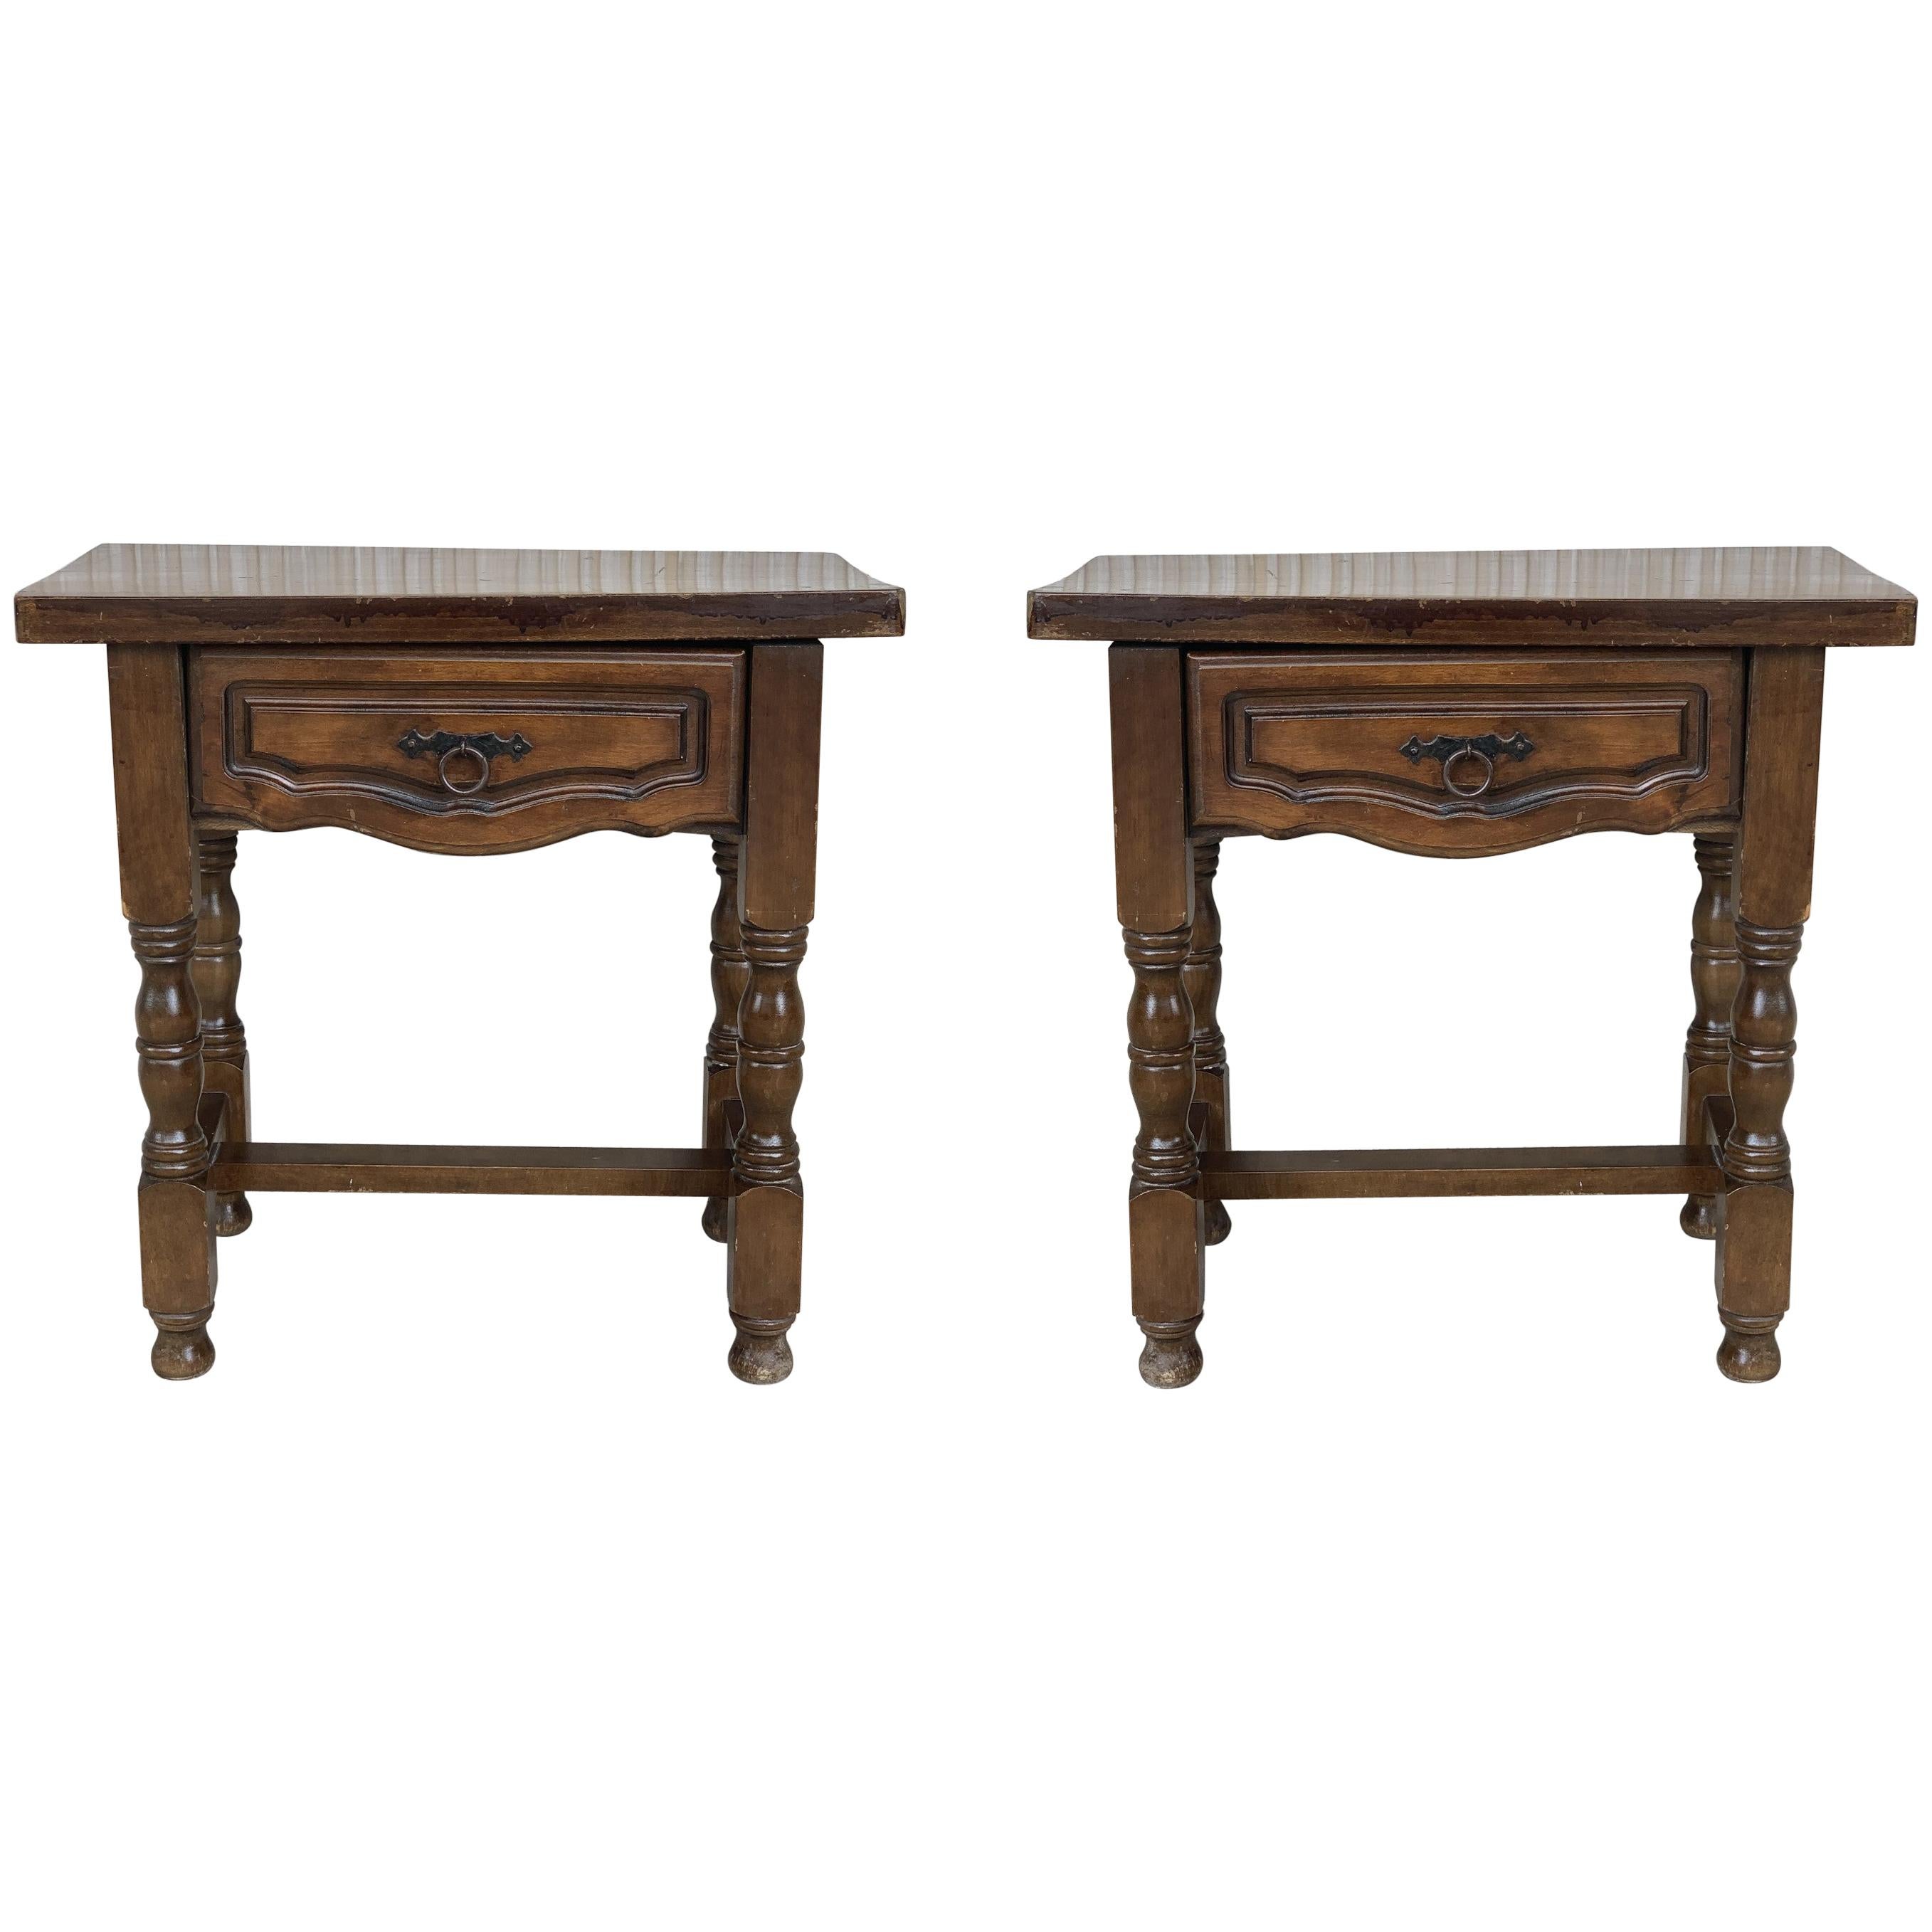 19th Century Pair of Spanish Nightstands, Side Tables with Carved Drawer